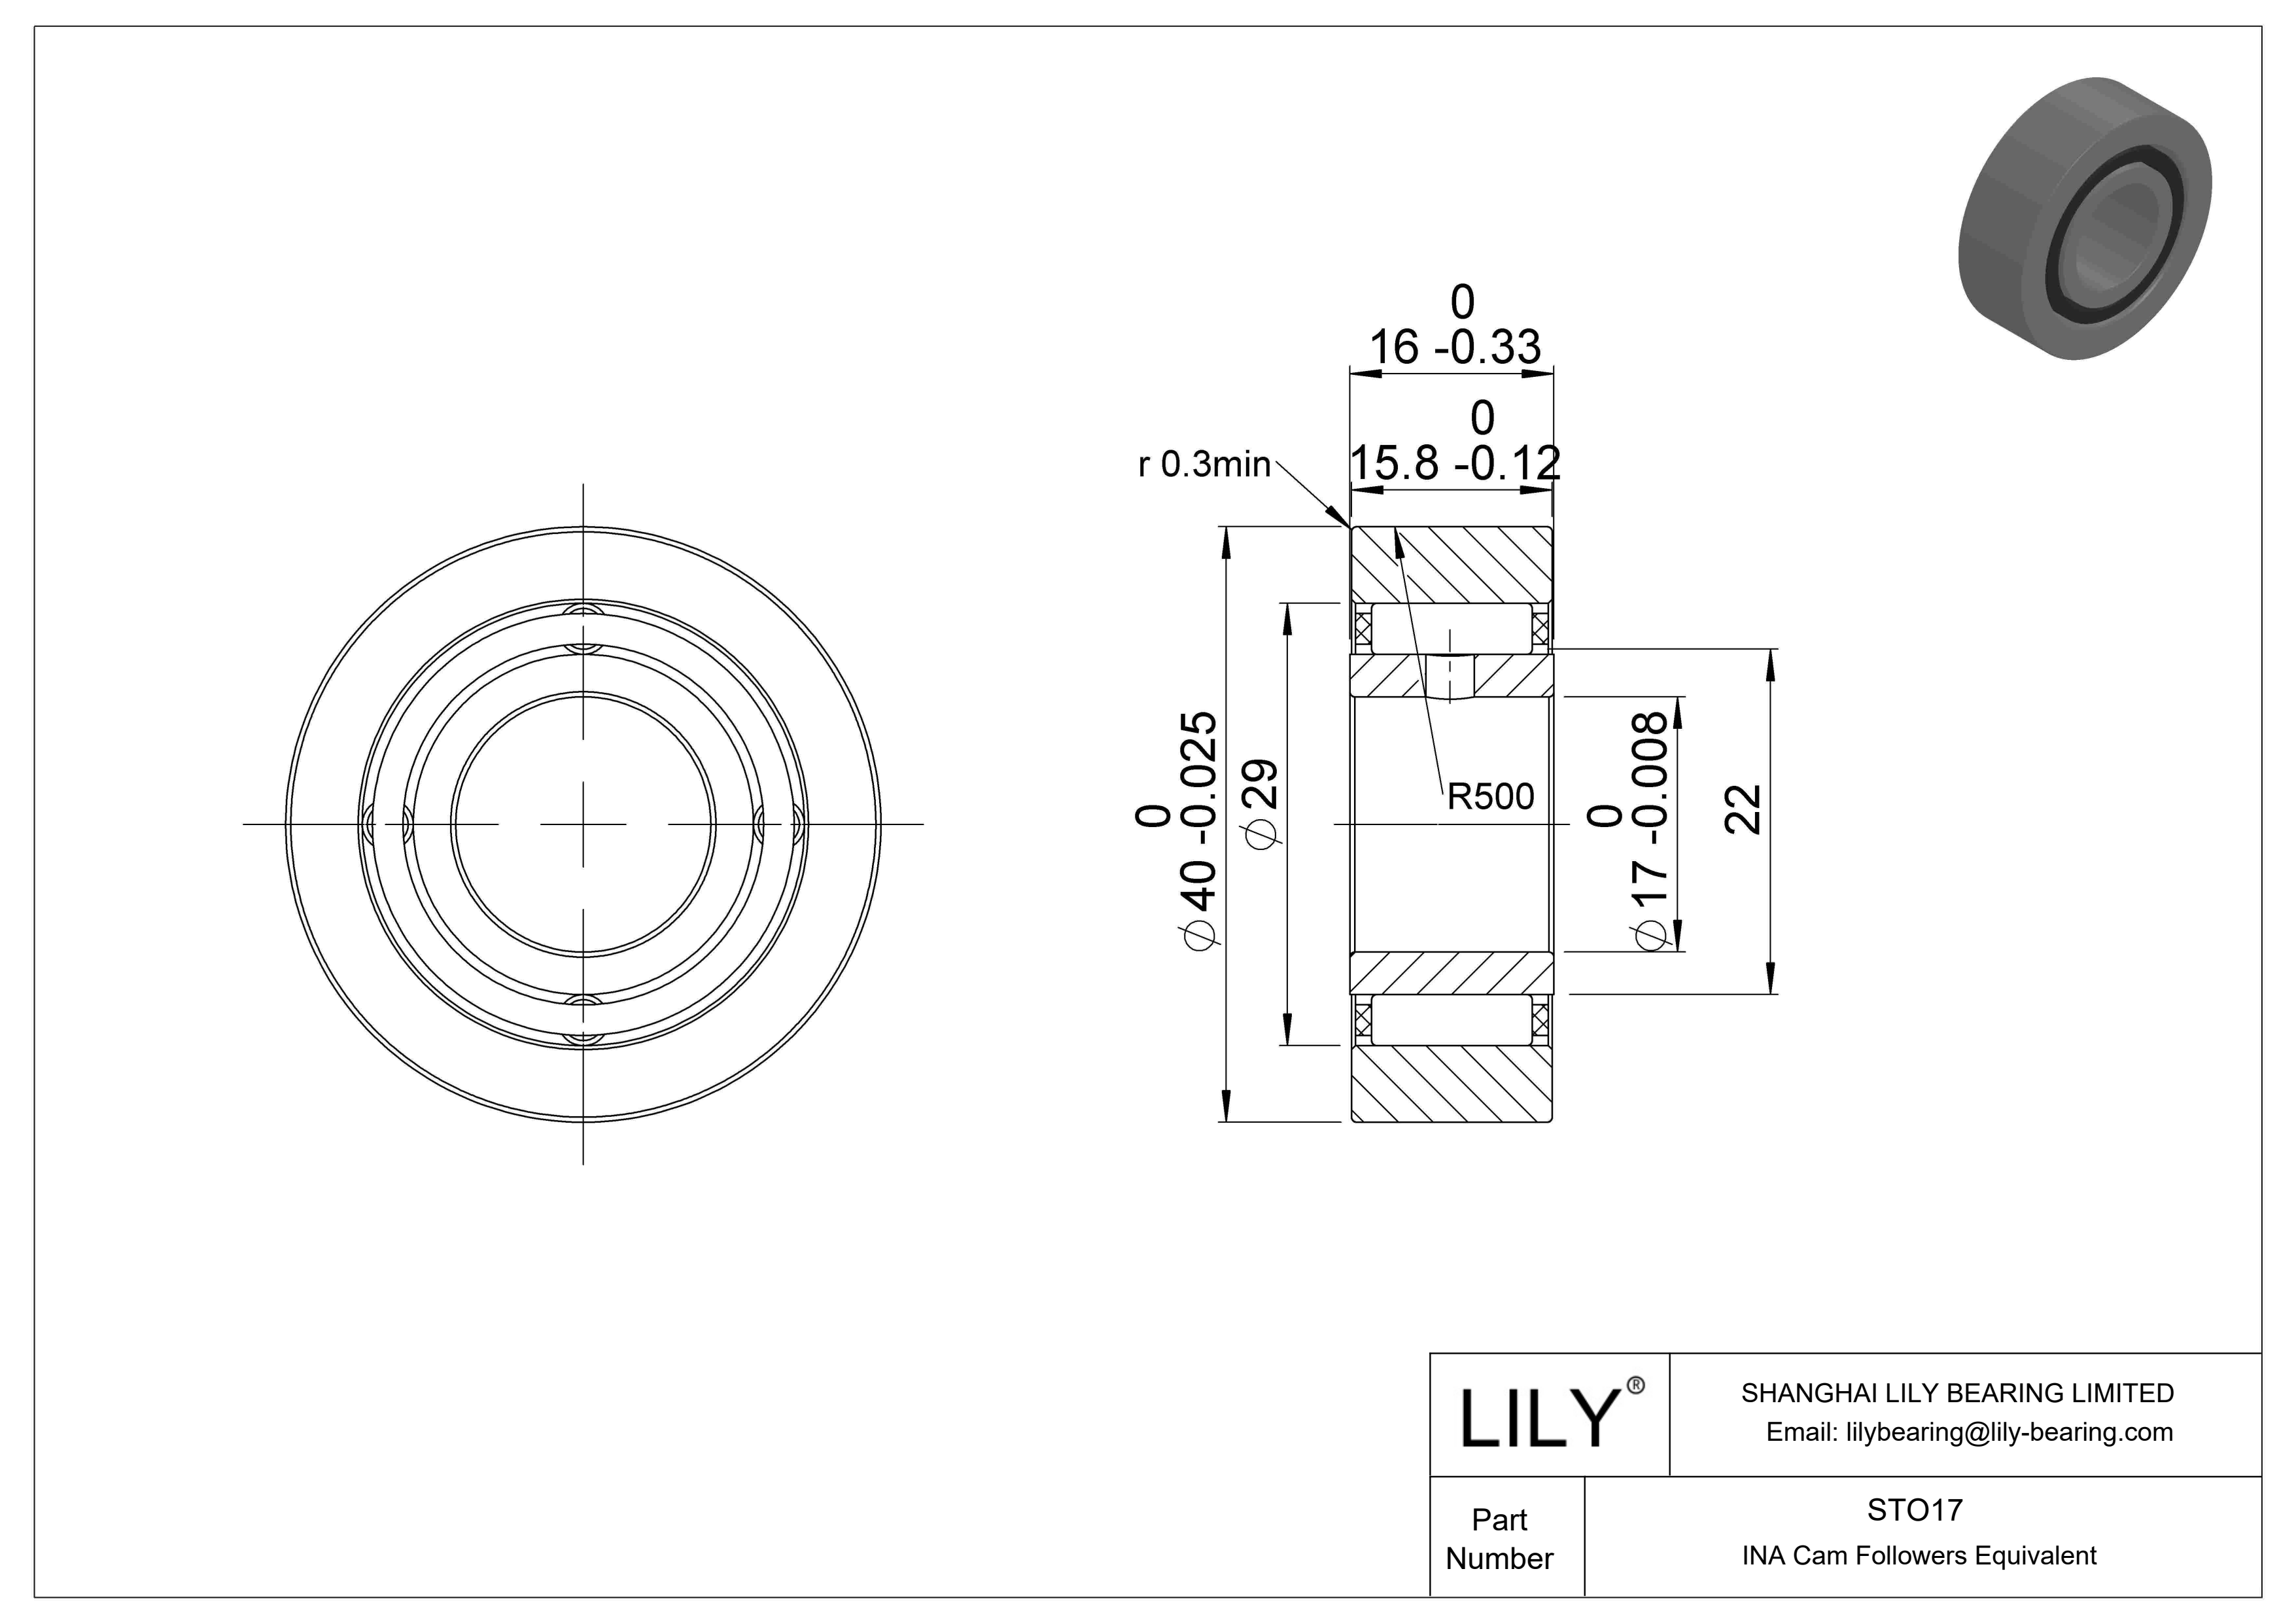 STO17 Yoke Type Track Rollers cad drawing